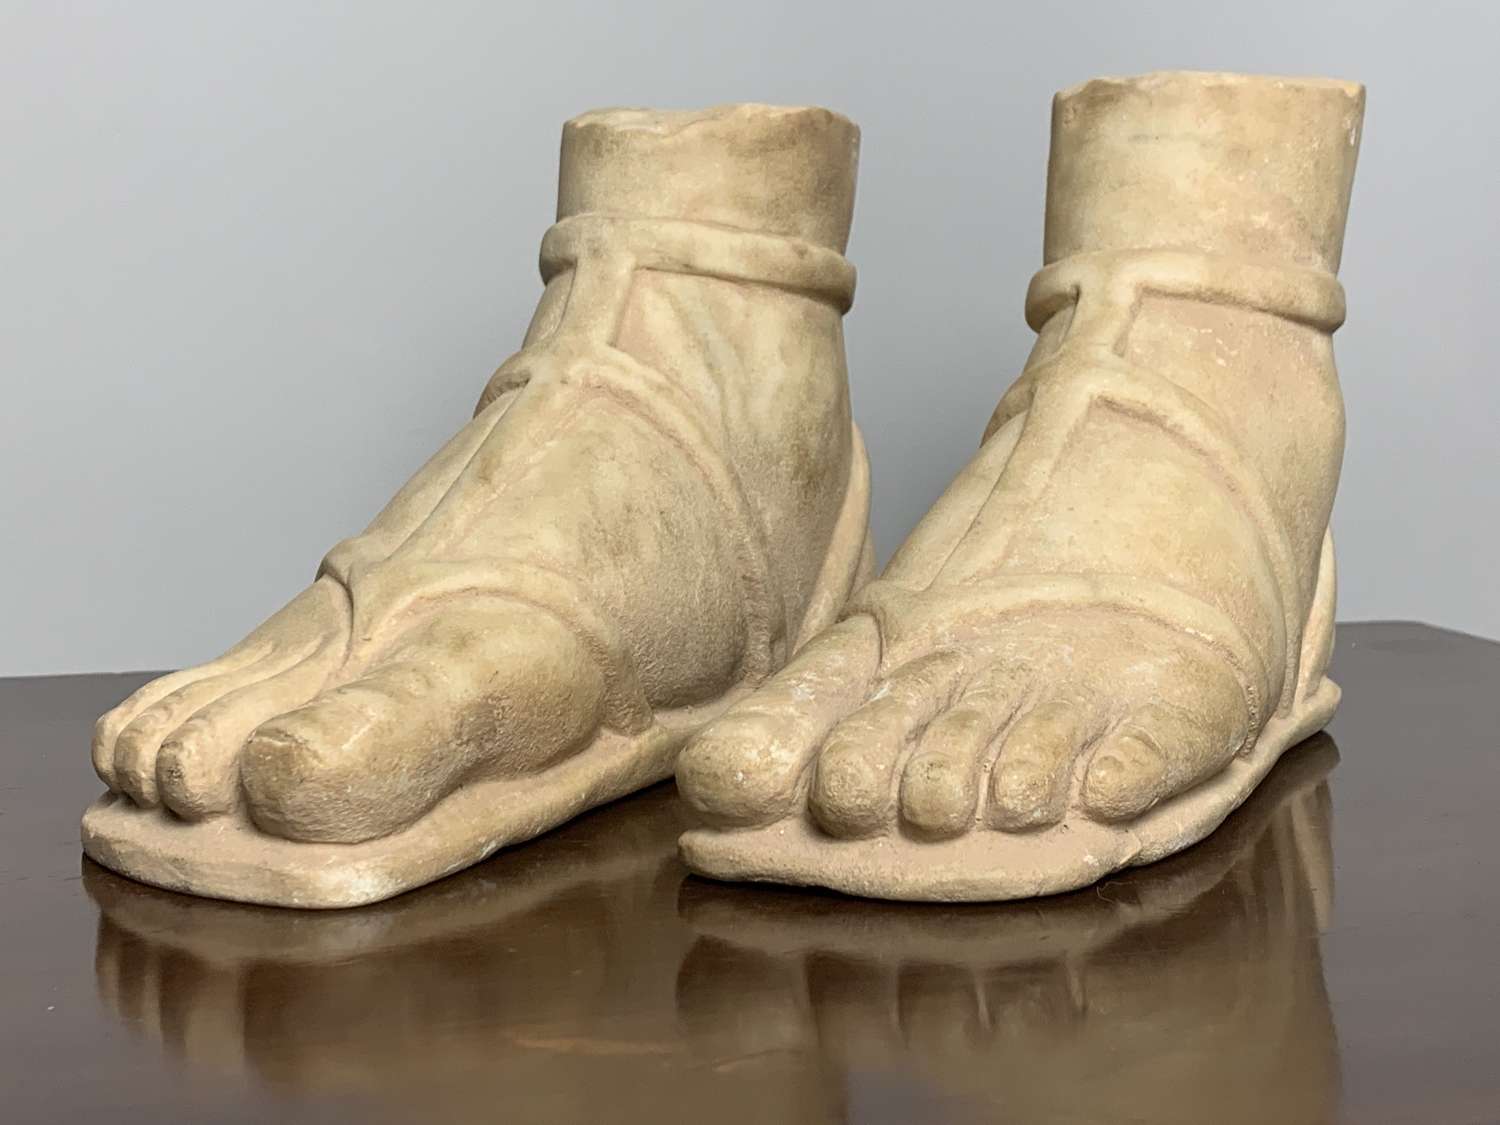 Pair of Carved Marble Roman Feet After the Antique